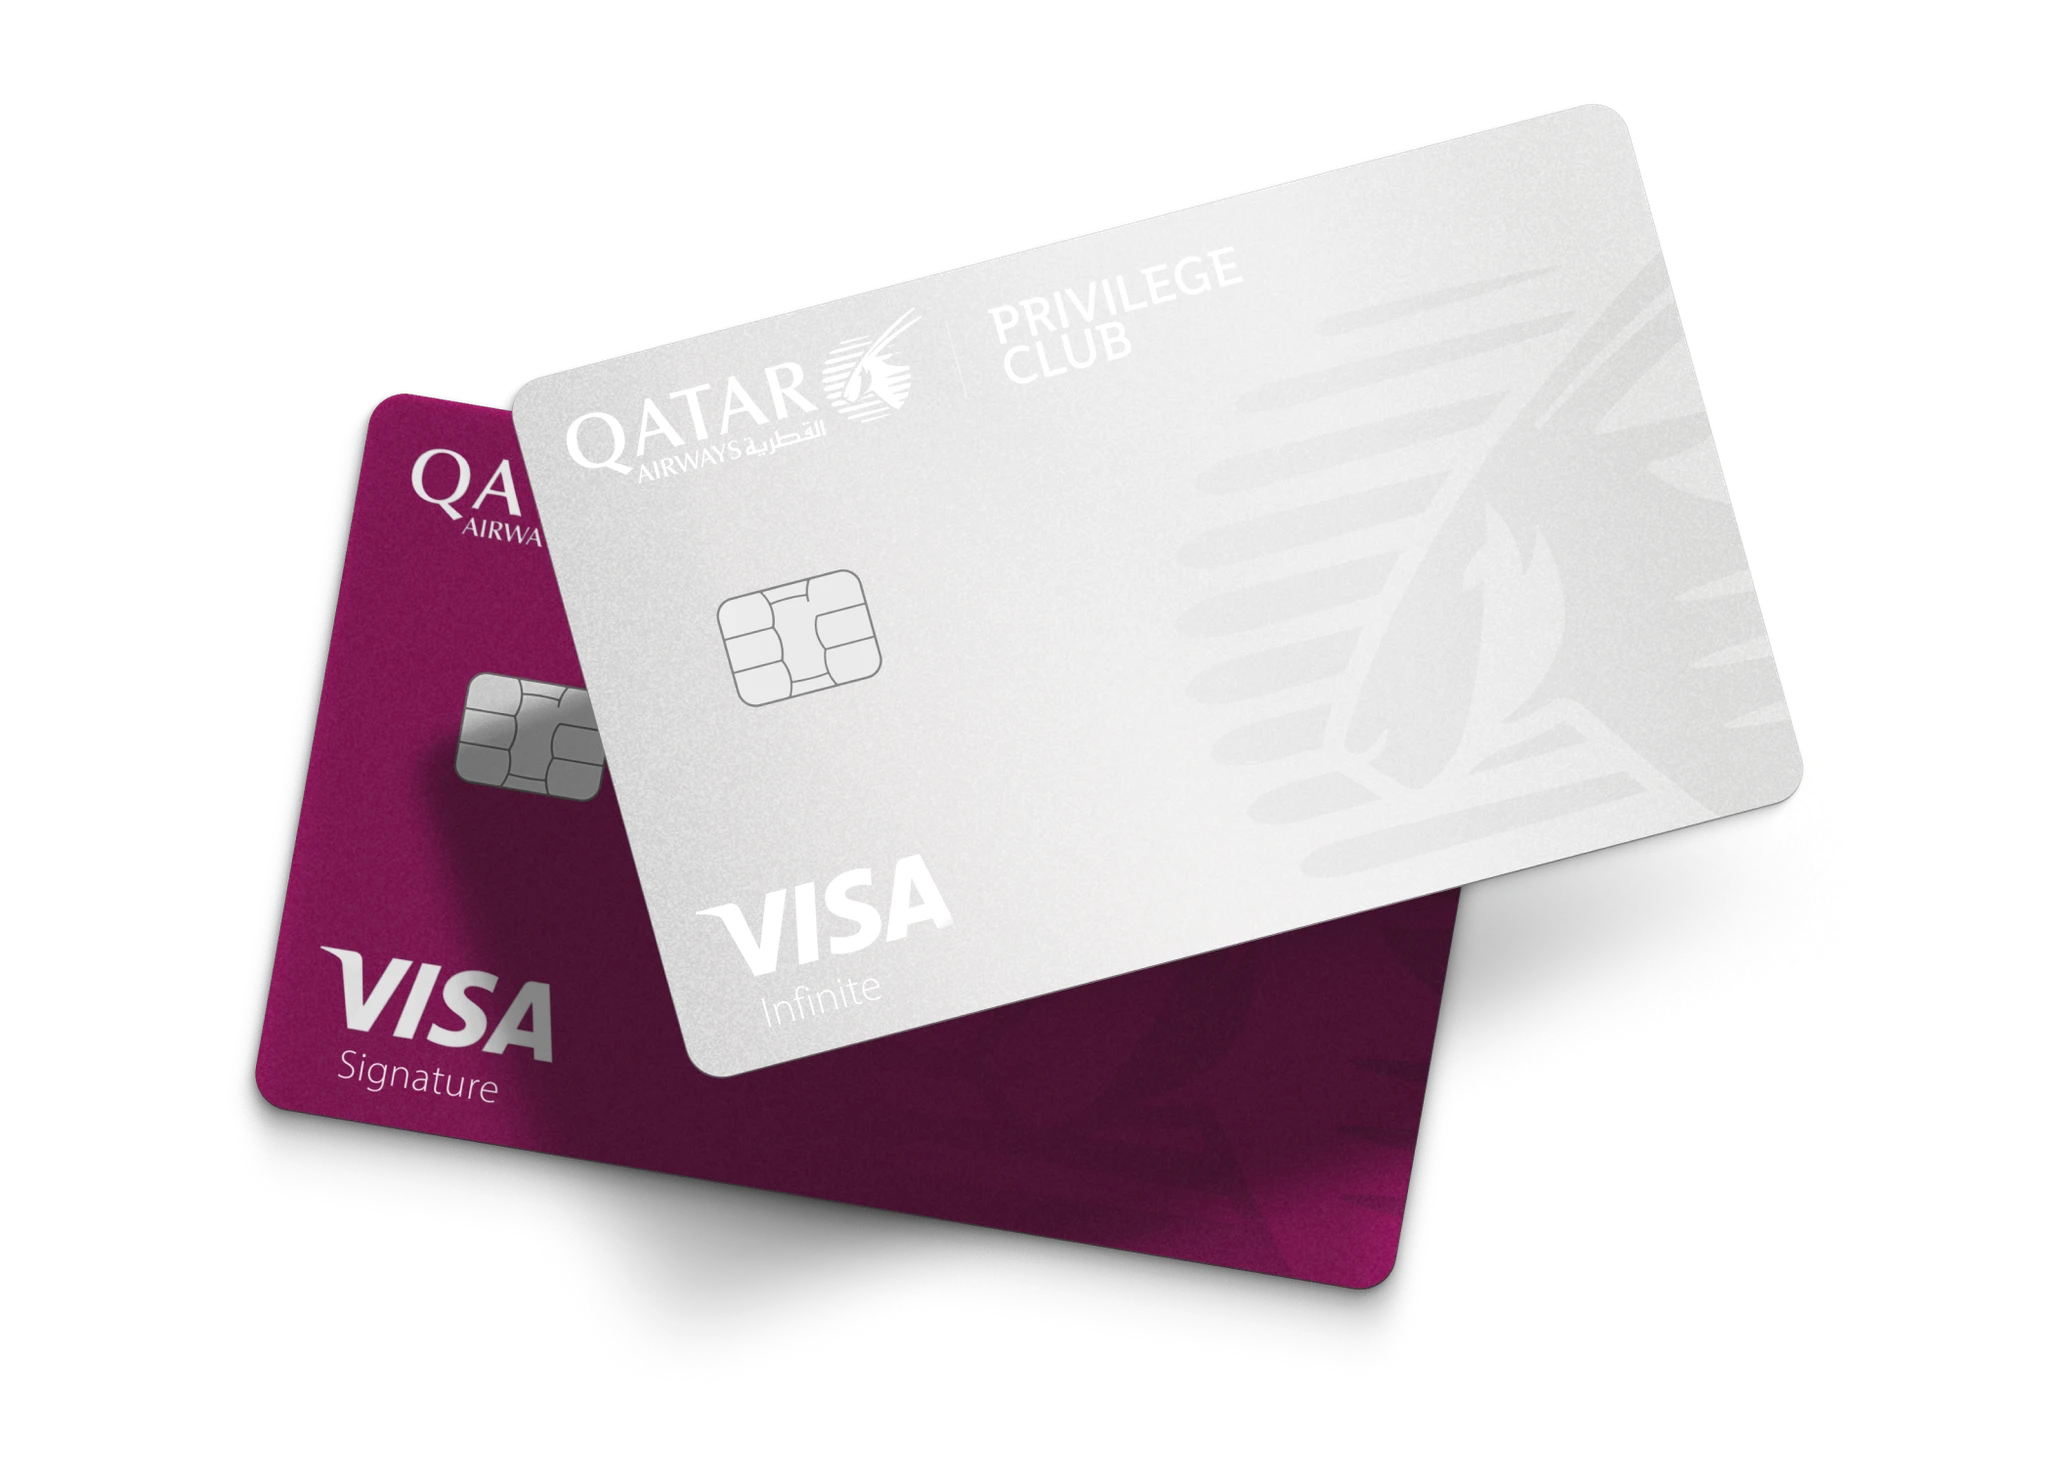 Qatar Airways Launching U.S. Credit Card, How To Get Extra 10,000 Points When It Goes Live